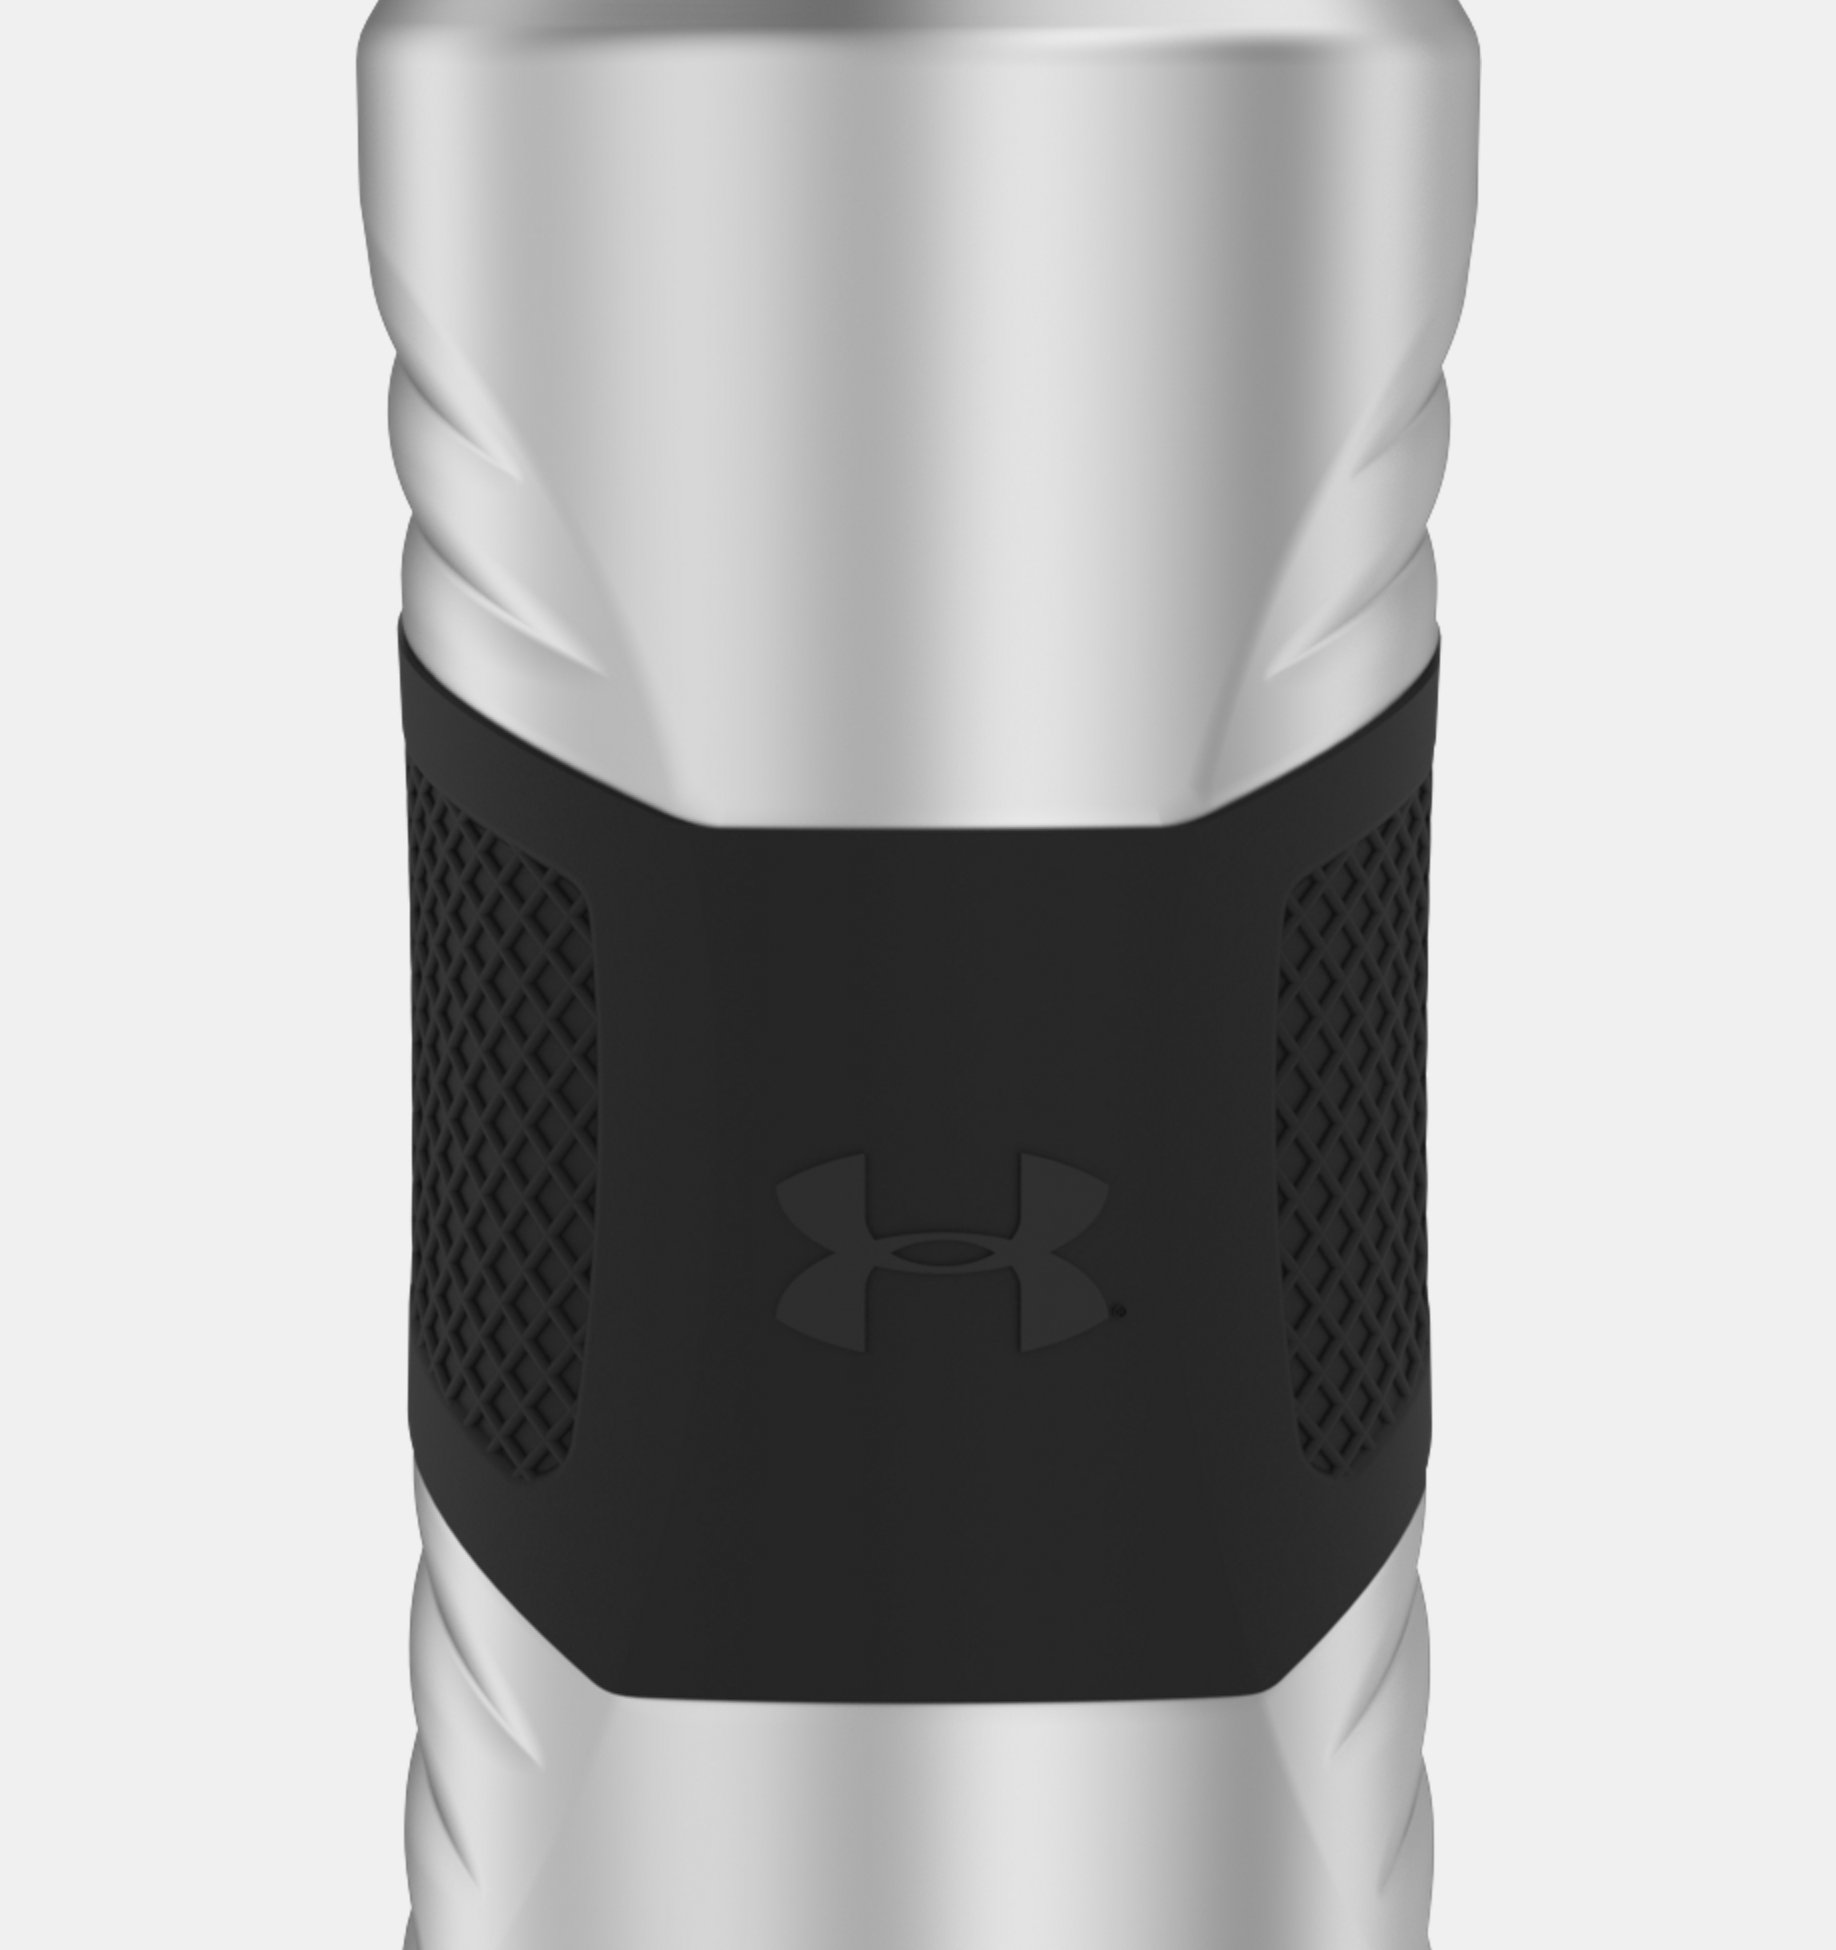 Under Armour 24oz Grip Water Bottle, Pro Lid Cover, Silicone Body Grip,  Shatter Proof, Stain & Odor Resistant